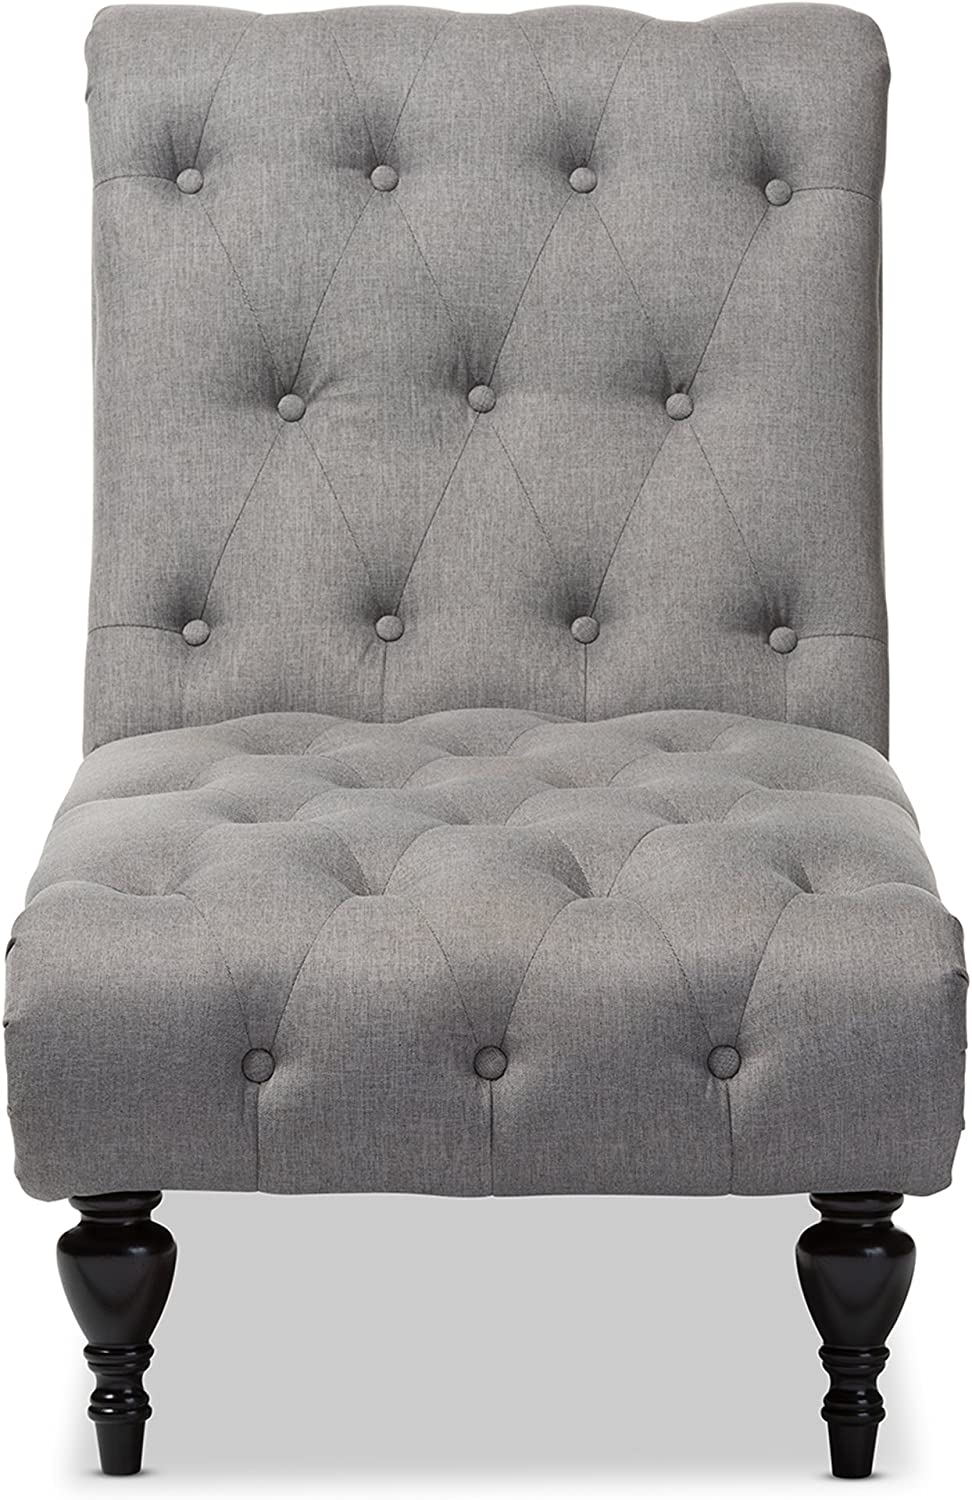 Baxton Studio Layla Mid-century Retro Modern Grey Fabric Upholstered Button-tufted Chaise Lounge, Grey